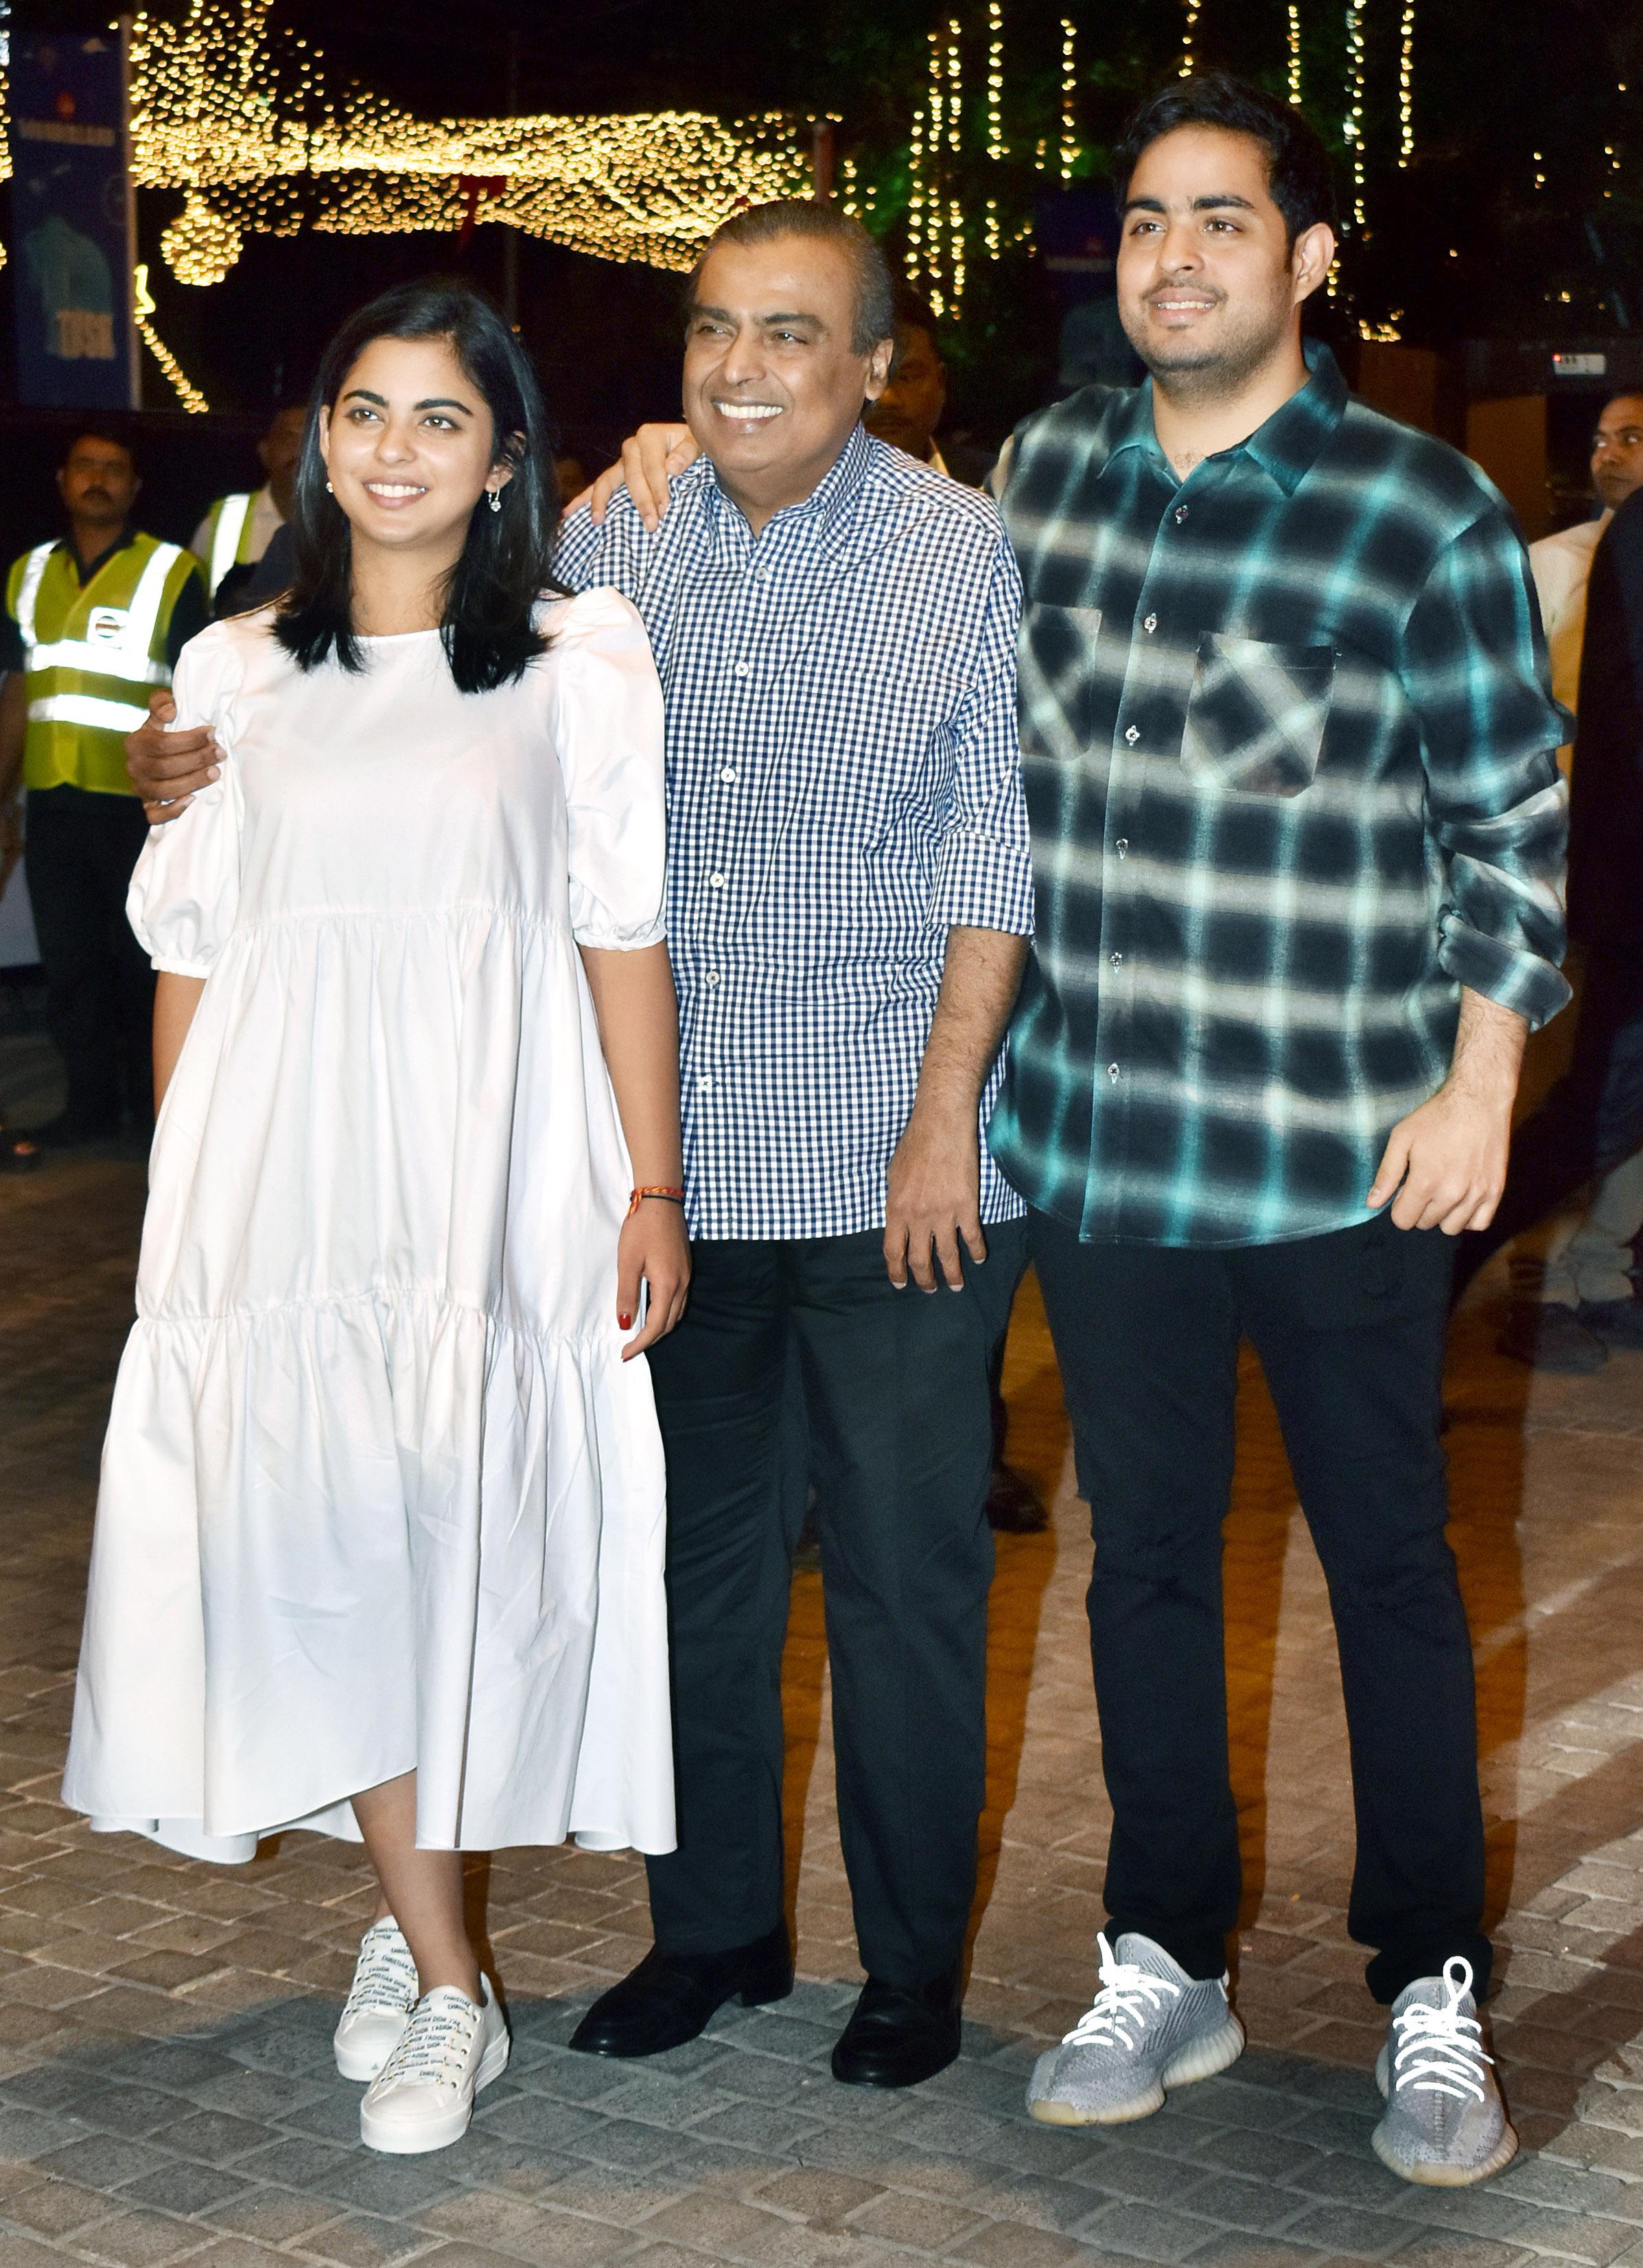 Business tycoon Mukesh Ambani was snapped by the paparazzi alongside his daughter Isha and son Akash at the red carpet premiere night of JioWonderland held at Jio World Garden in BKC